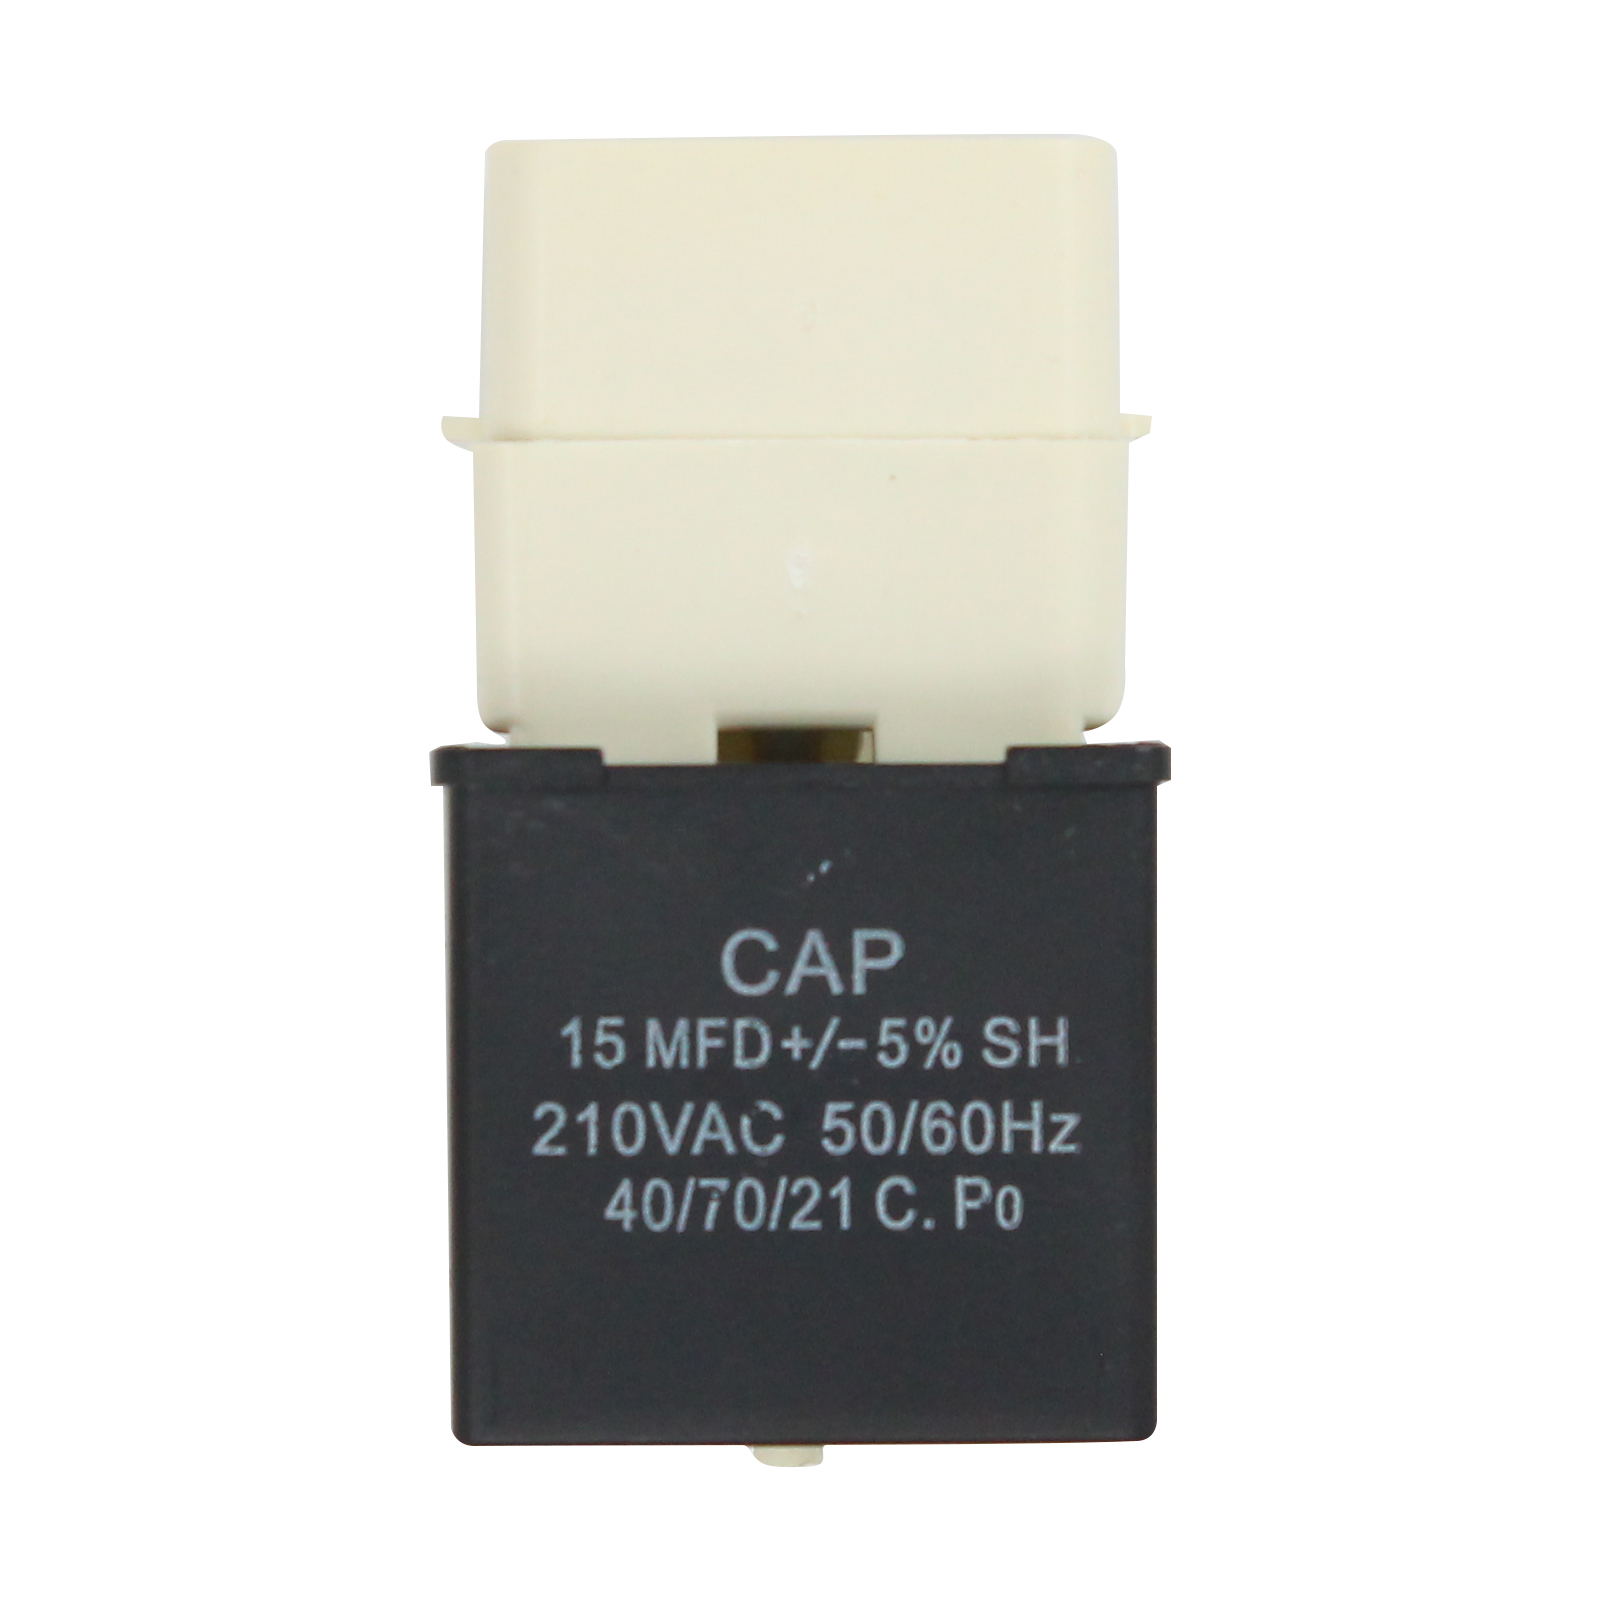 W10613606 Refrigerator Compressor Start Relay & Capacitor Replacement for Amana SLD25MBL (P1121103W L) Refrigerator - Compatible with W10613606 Start Device Relay Overload With Capacitor - image 2 of 4